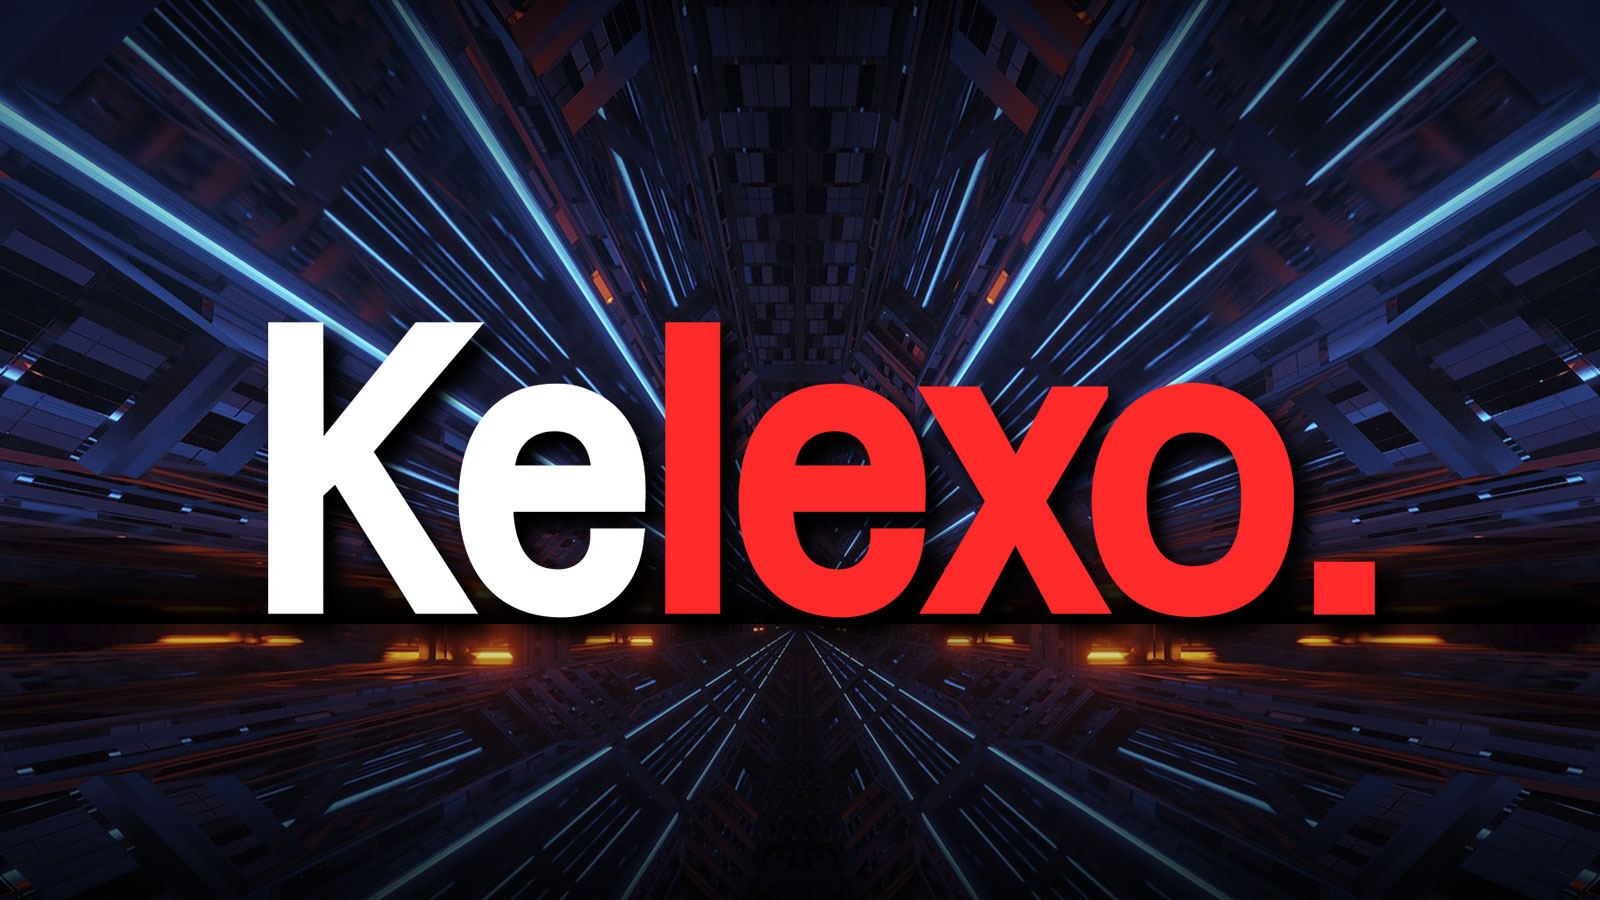 Kelexo (KLXO) Cryptocurrency Pre-Sale Gaining Steam in March as Cardano (ADA) and Ethereum Classic (ETC) Major Altcoins In Green